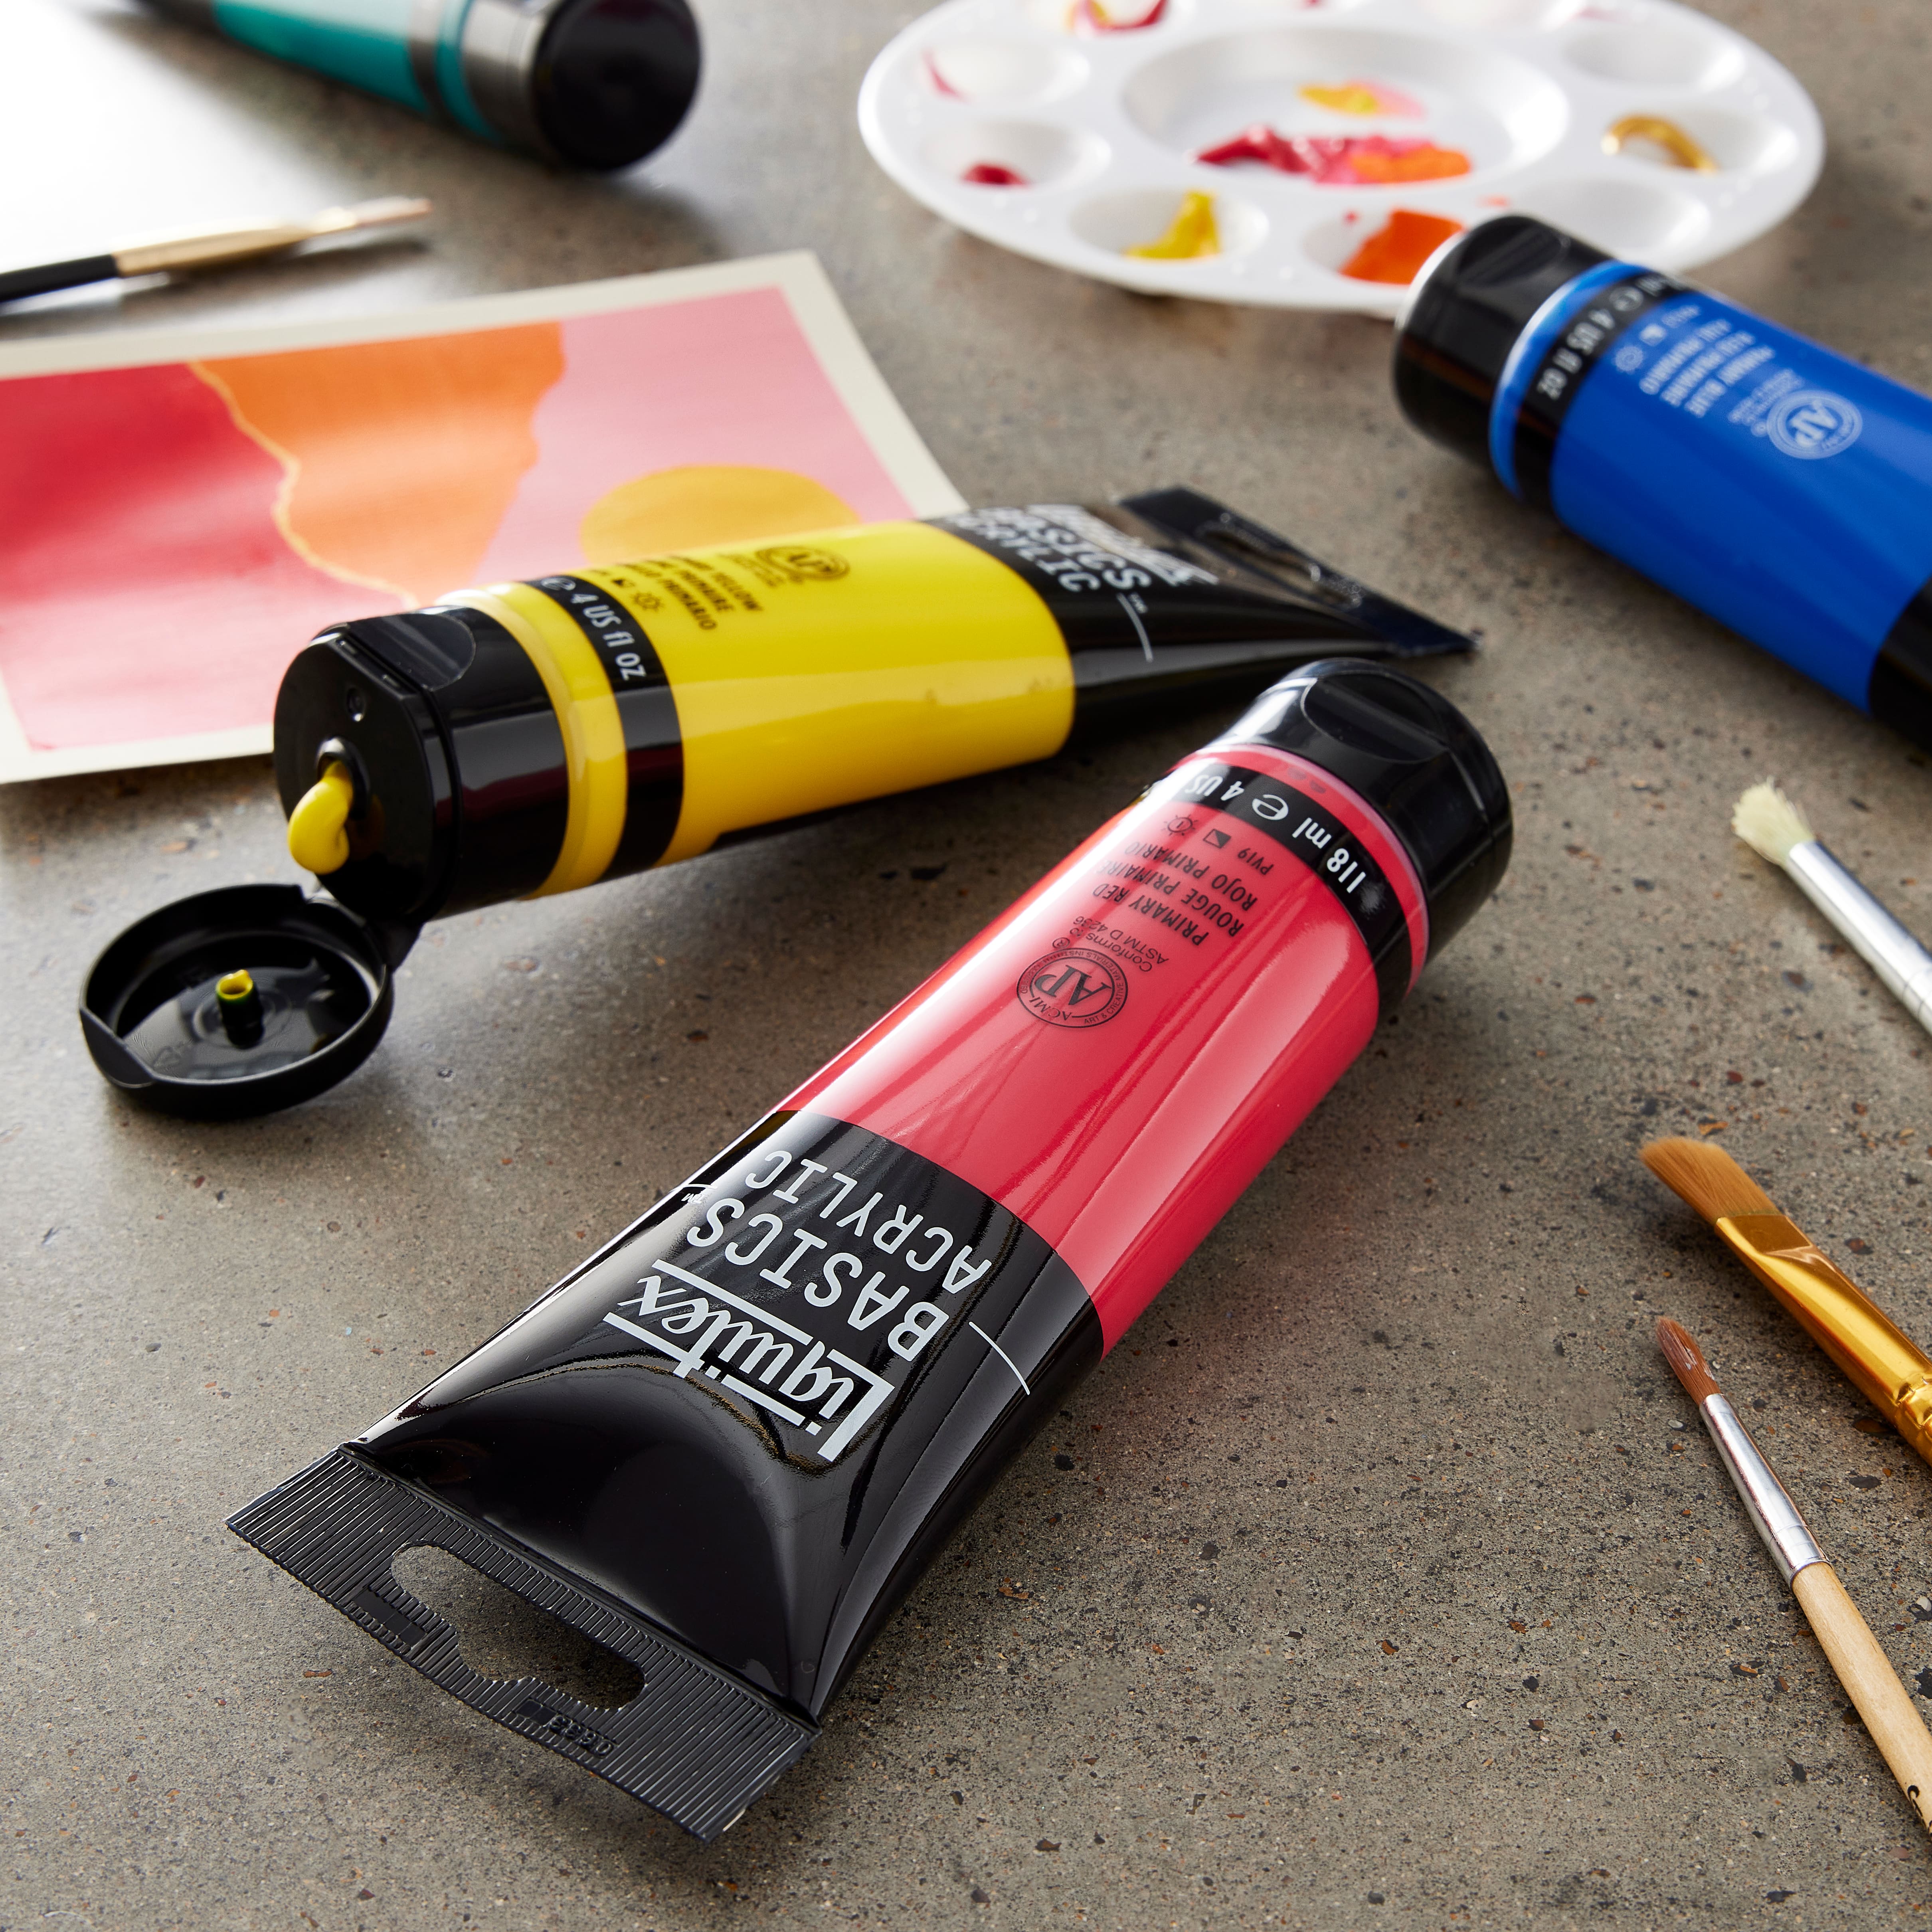 Product Review - Liquitex Basics Acrylic Paint Set, Primary Color Mixing  Blue+Red=Purple 